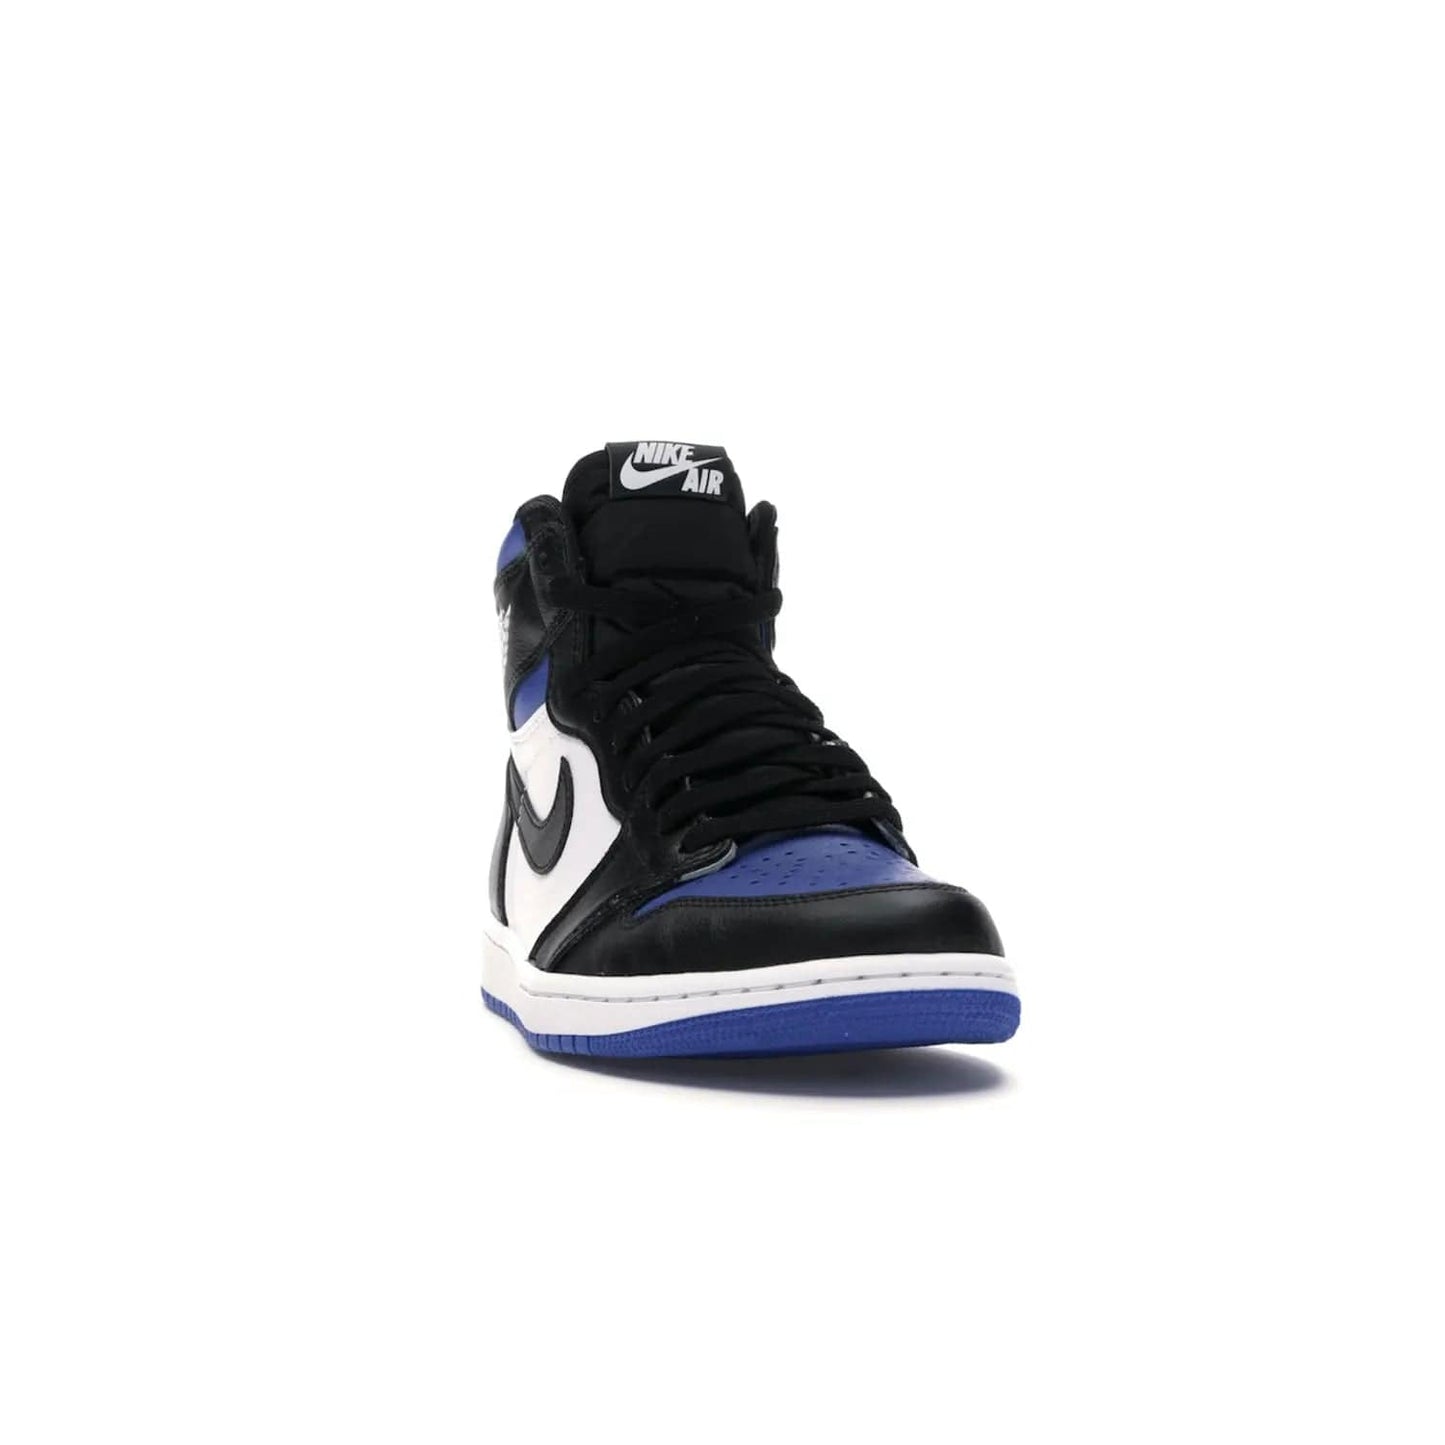 Jordan 1 Retro High Royal Toe - Image 8 - Only at www.BallersClubKickz.com - Refresh your look with the Jordan 1 Retro High Royal Toe. This classic AJ 1 sports a white and royal leather upper, black leather overlays, and branded leather tongue tag. Pick up today and set the streets ablaze.